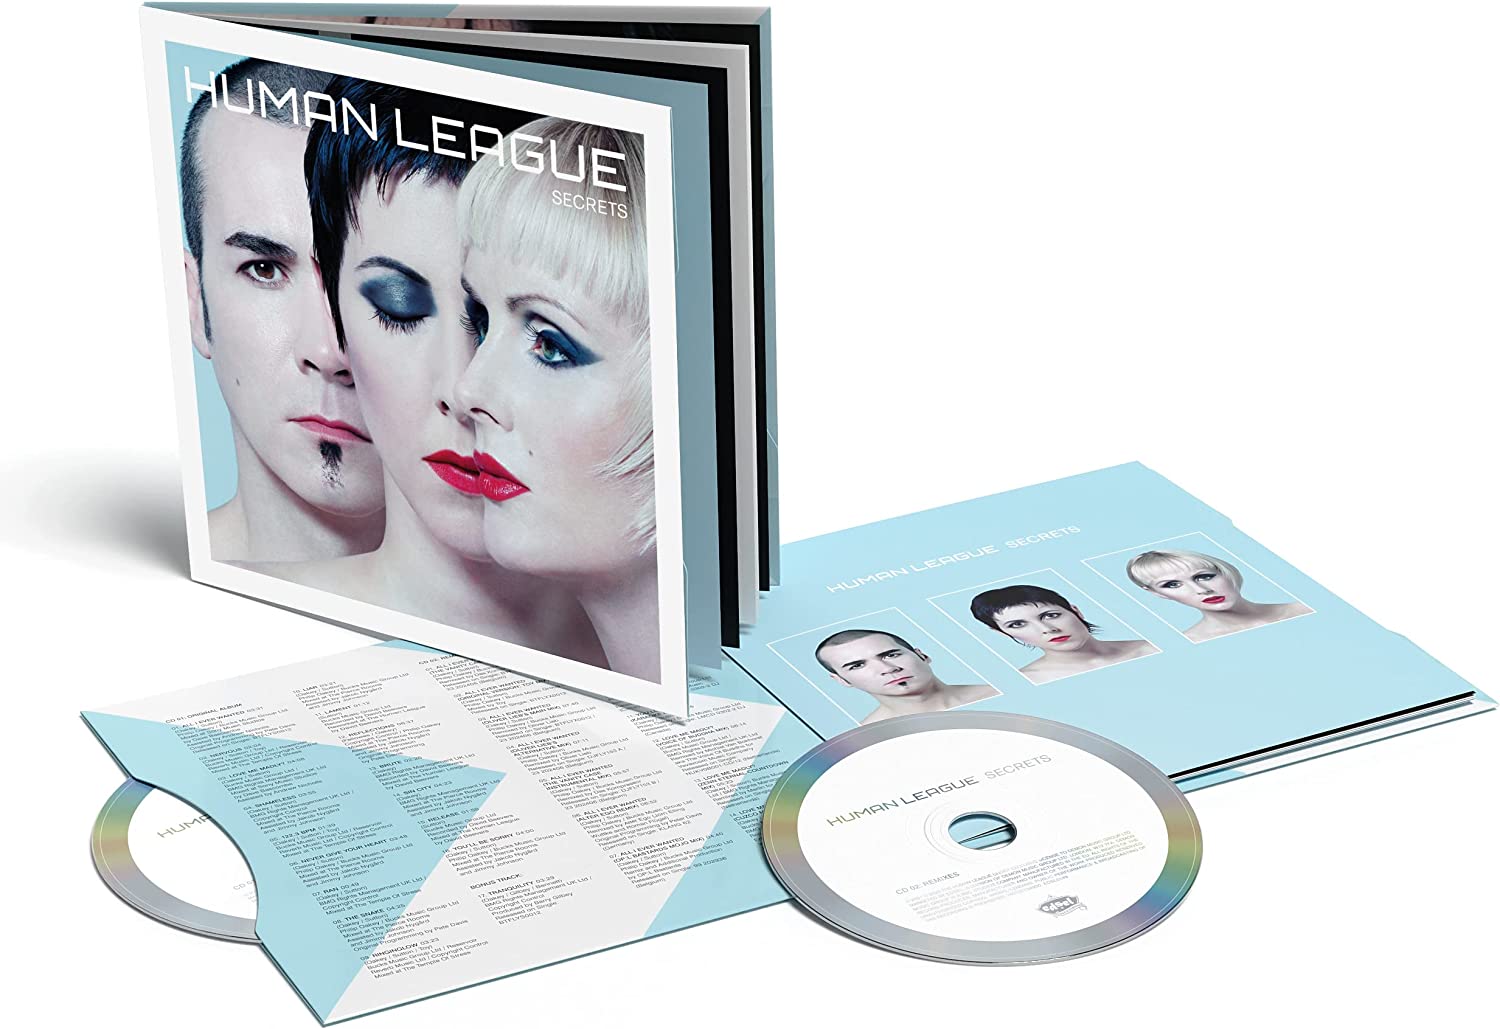 The Human League / Secrets 2CD reissue in deluxe seven-inch packaging